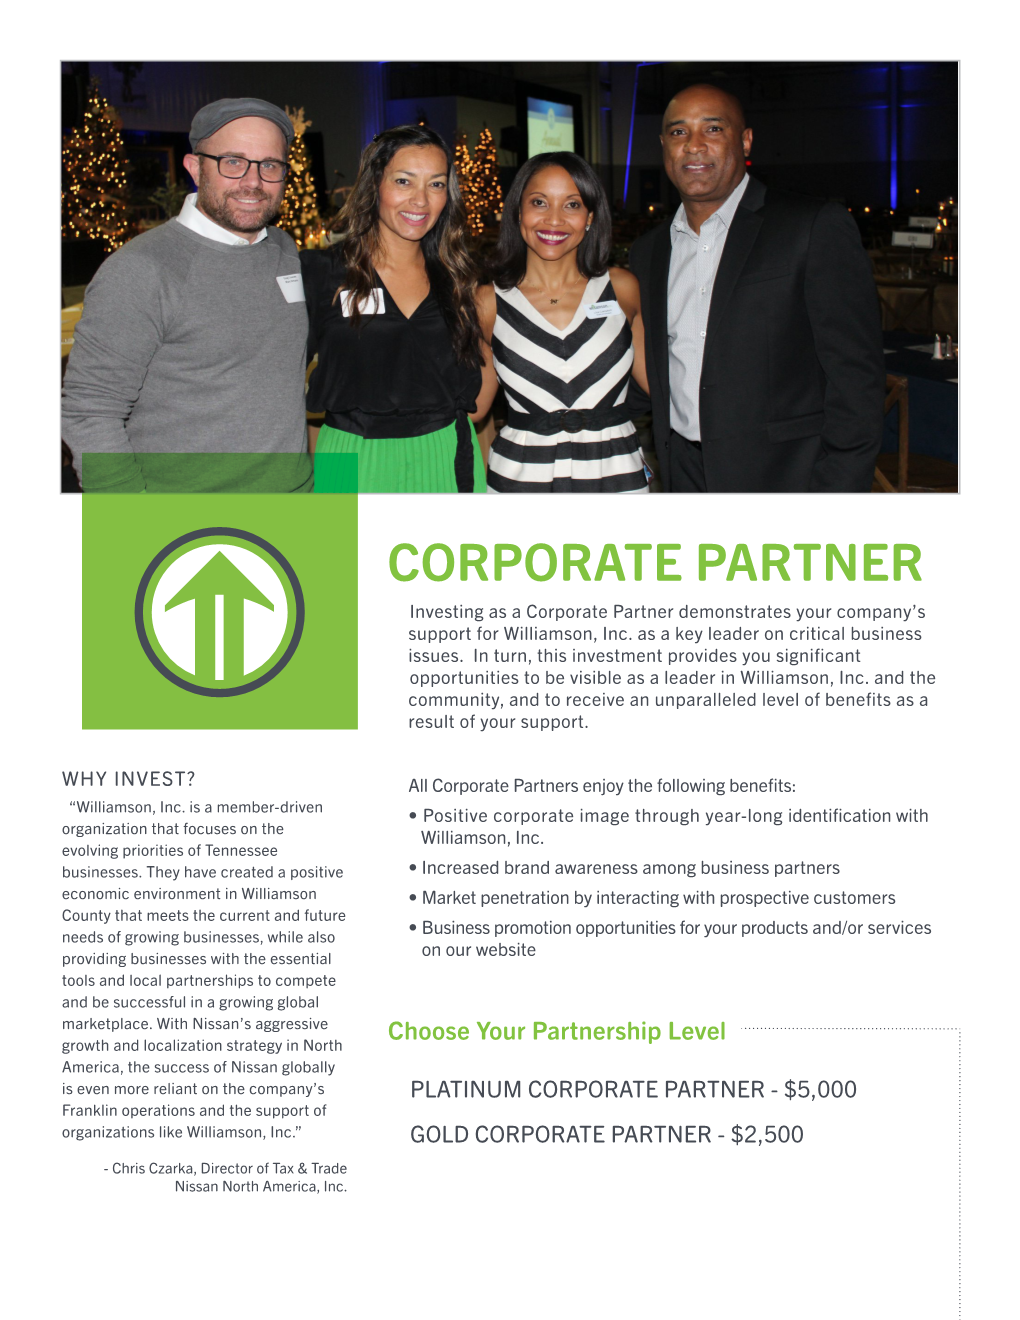 CORPORATE PARTNER Investing As a Corporate Partner Demonstrates Your Company’S Support for Williamson, Inc